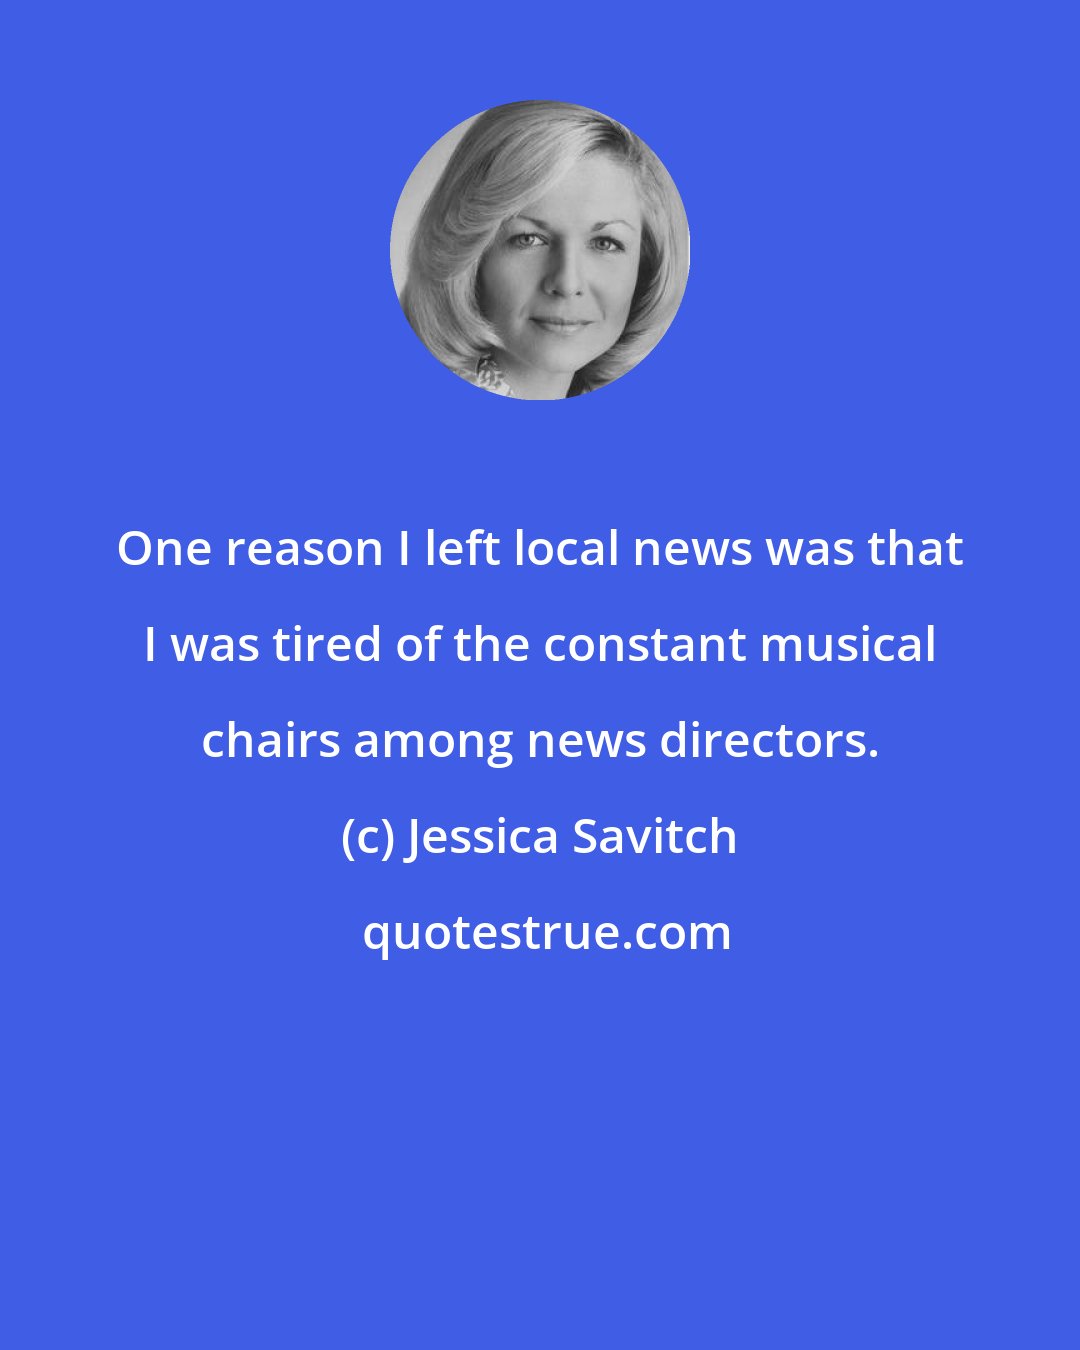 Jessica Savitch: One reason I left local news was that I was tired of the constant musical chairs among news directors.